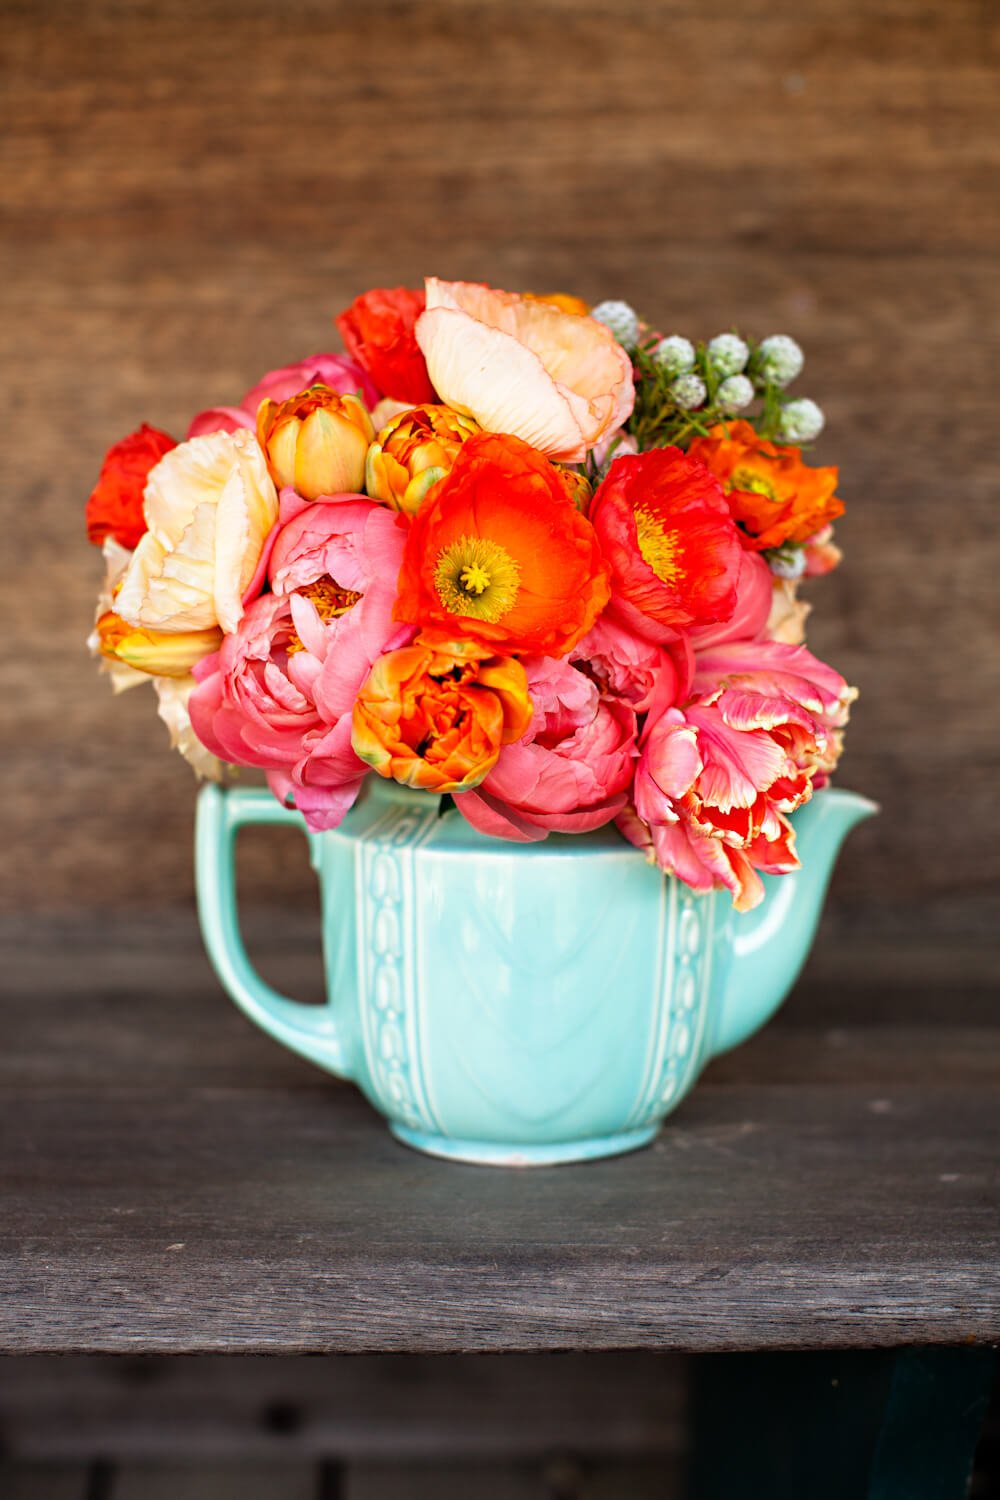 Cool Mint Teapot Bursting with Fiery Blossoms